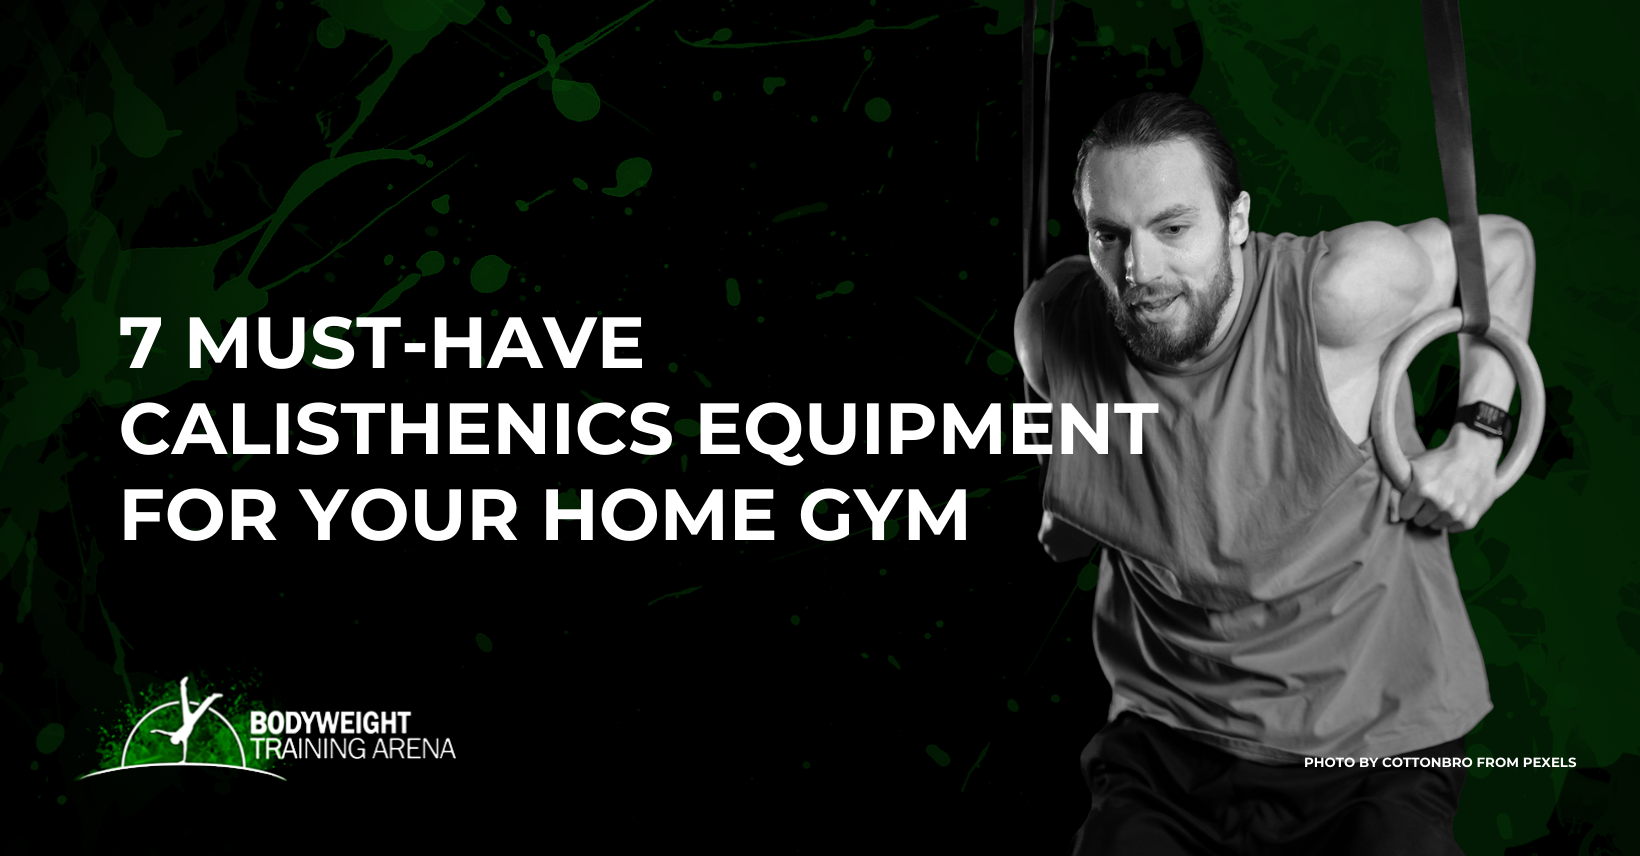 7 MUST-HAVE Calisthenics Equipment for Your Home Gym